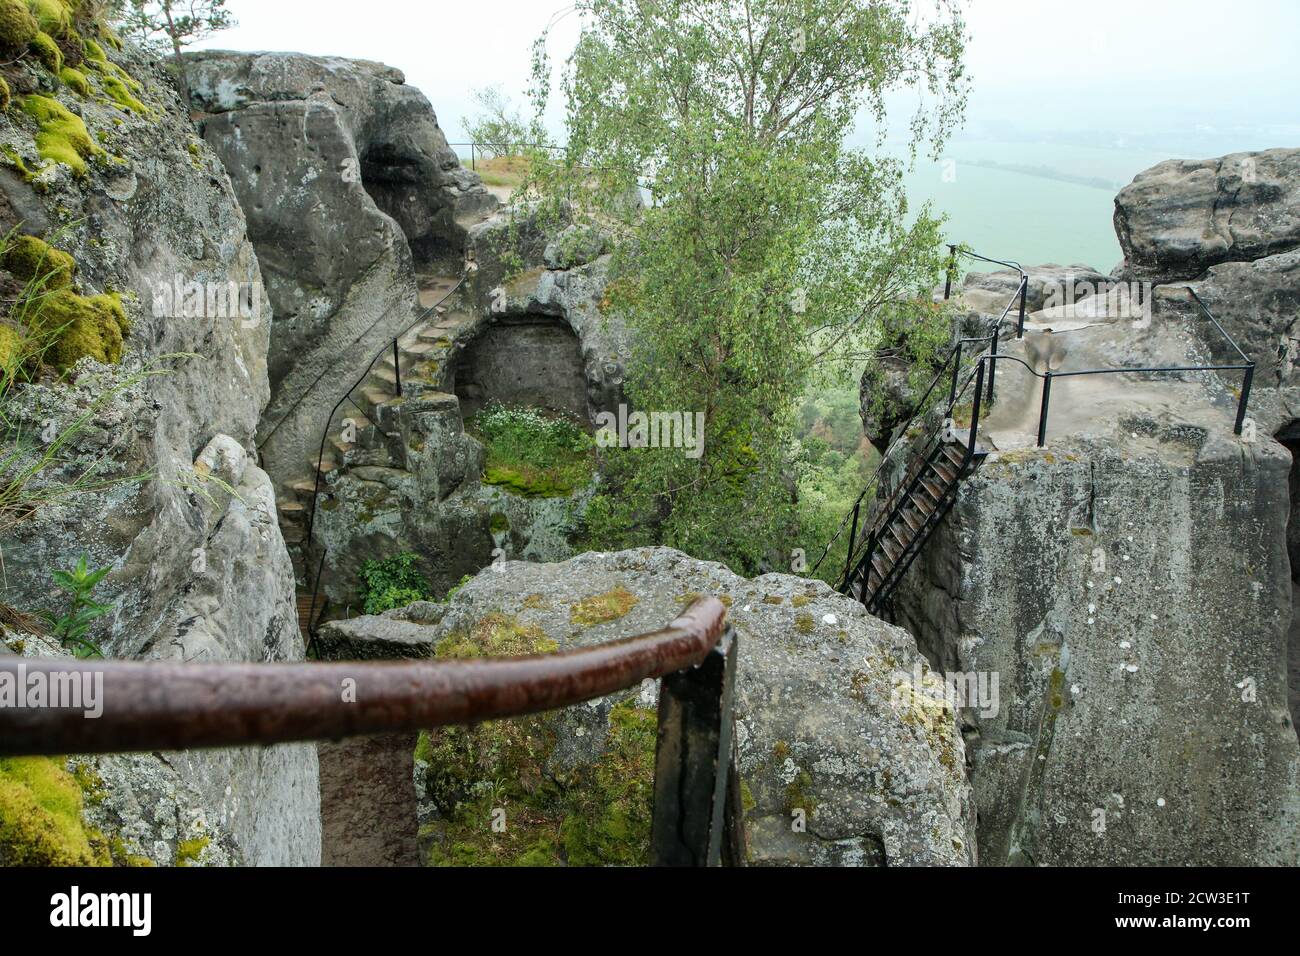 The picture from the natural area with rocks called "Drábské světničky" (Dráb´ s rooms) in Czech Republic. Stock Photo